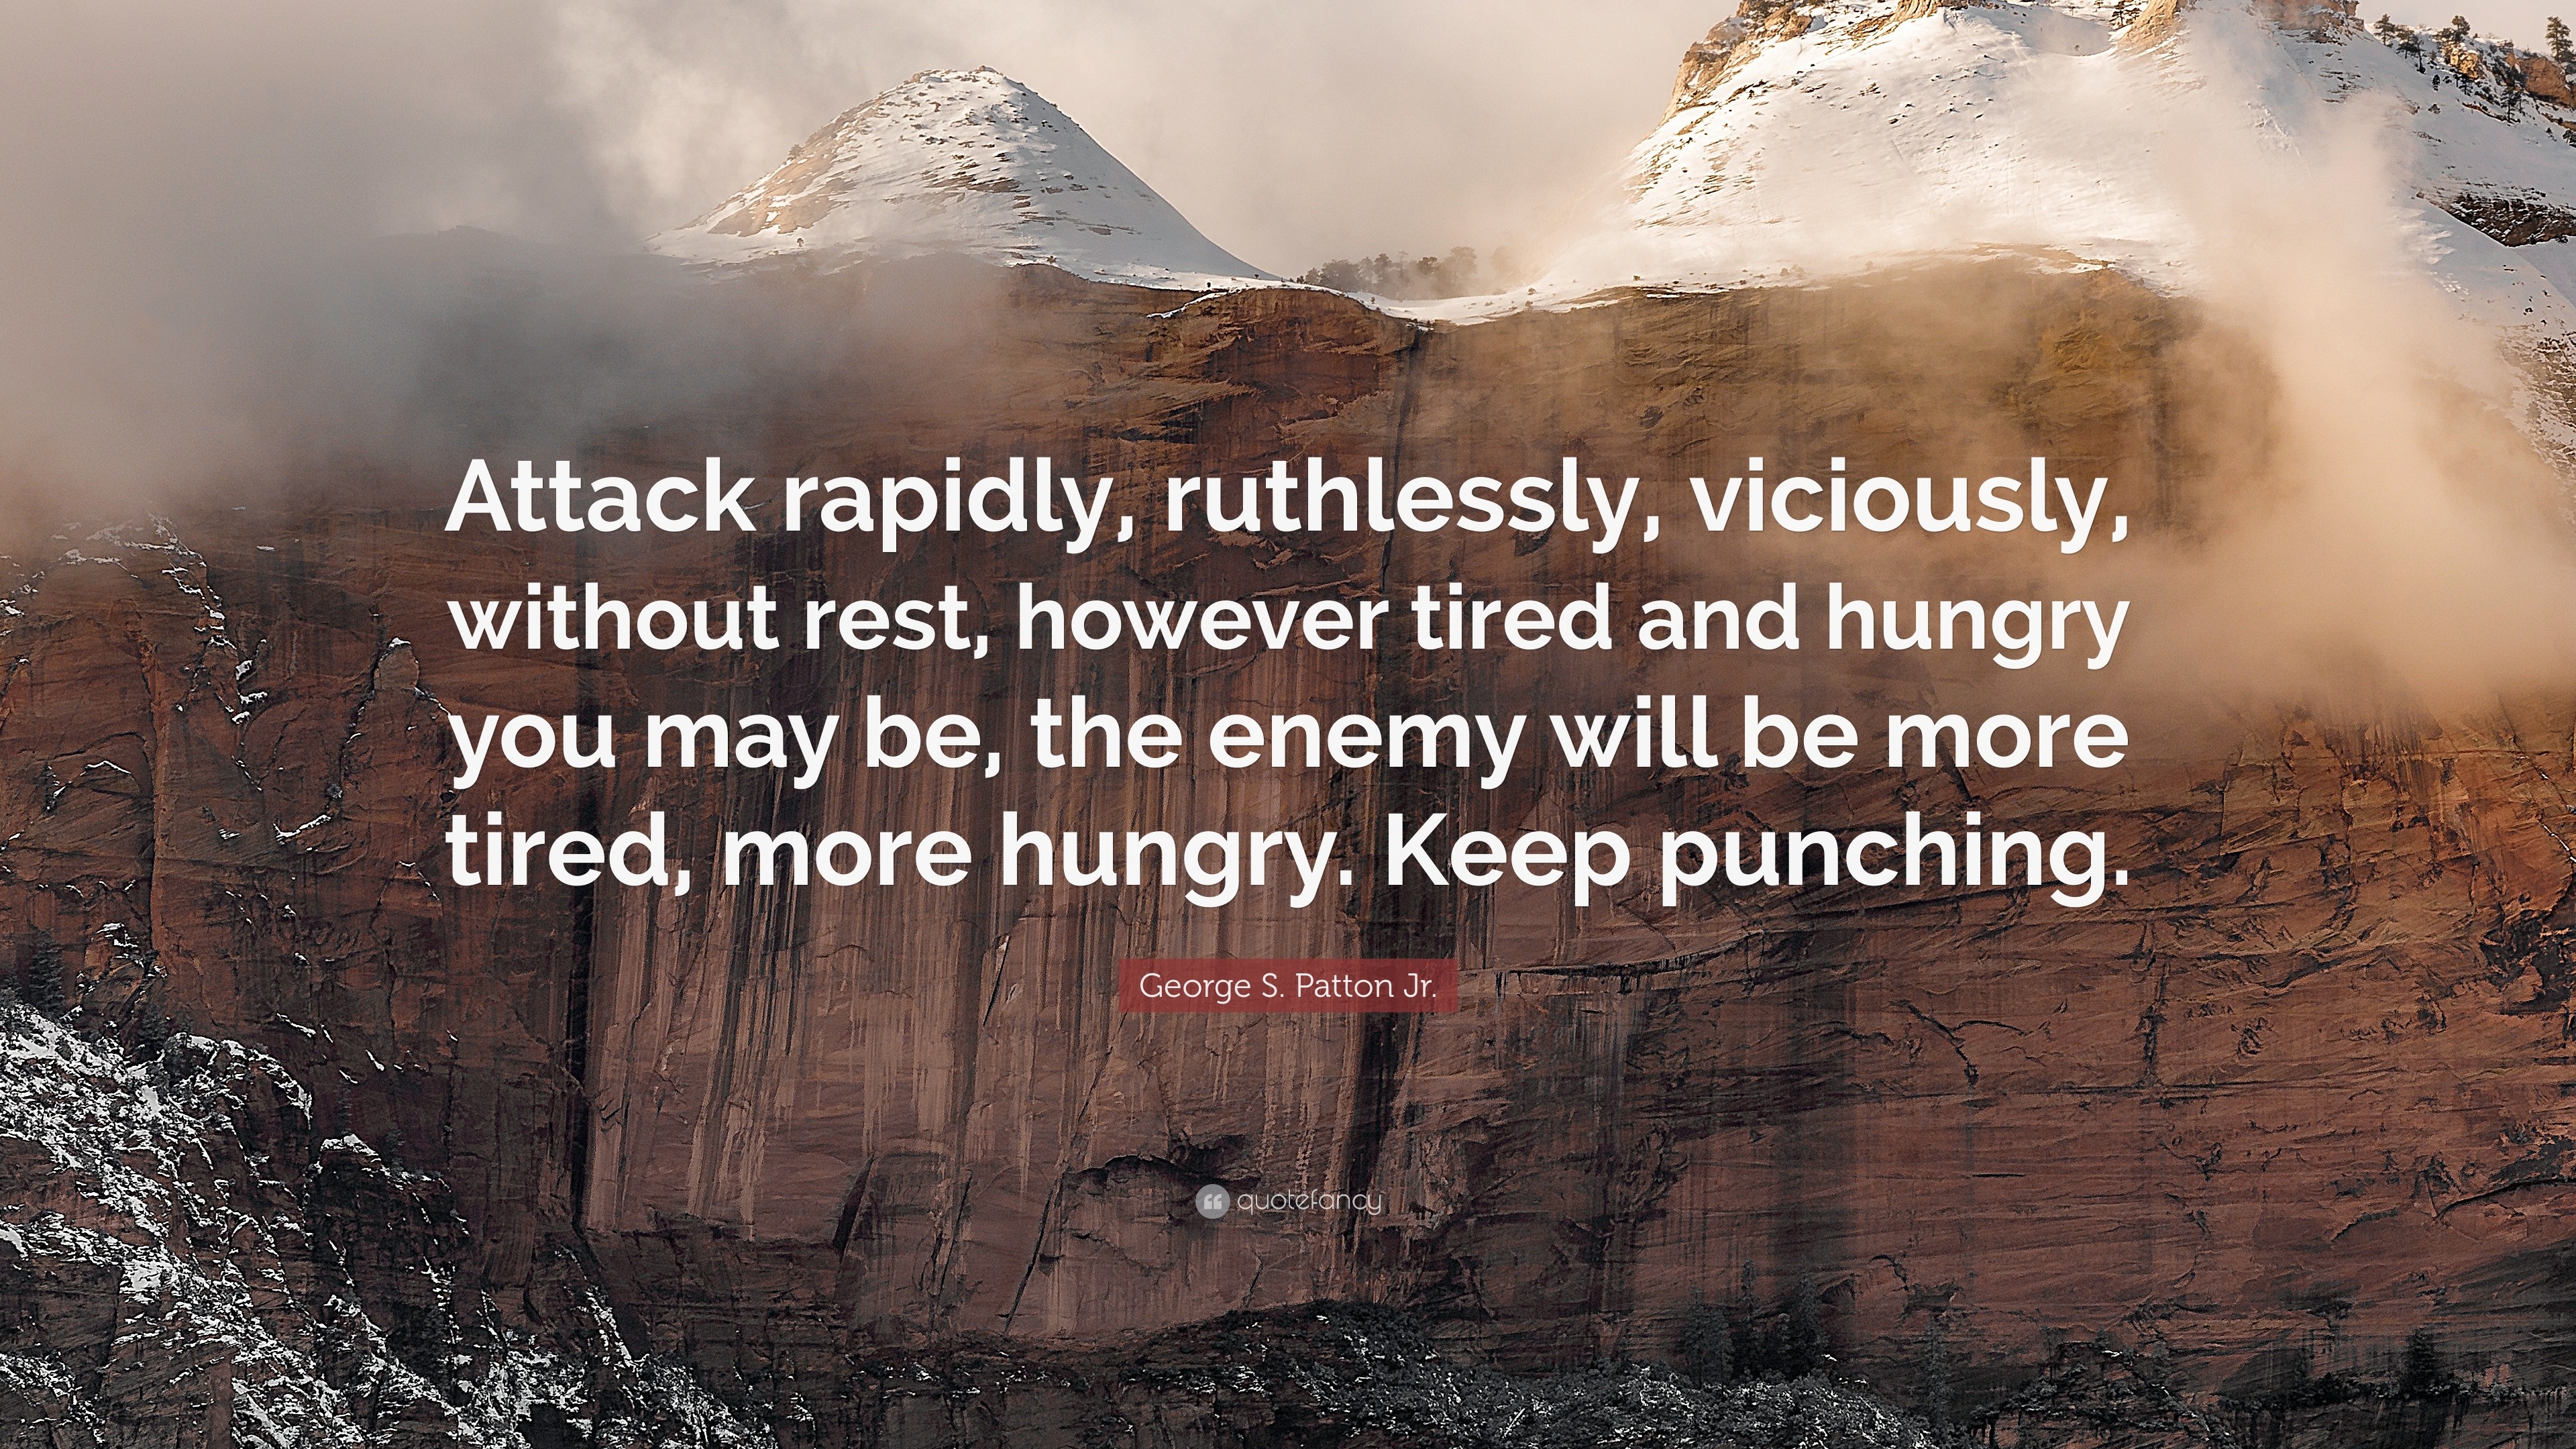 George S. Patton Jr. Quote: “Attack rapidly, ruthlessly, viciously, without  rest, however tired and hungry you may be, the enemy will be more tired,  ...”